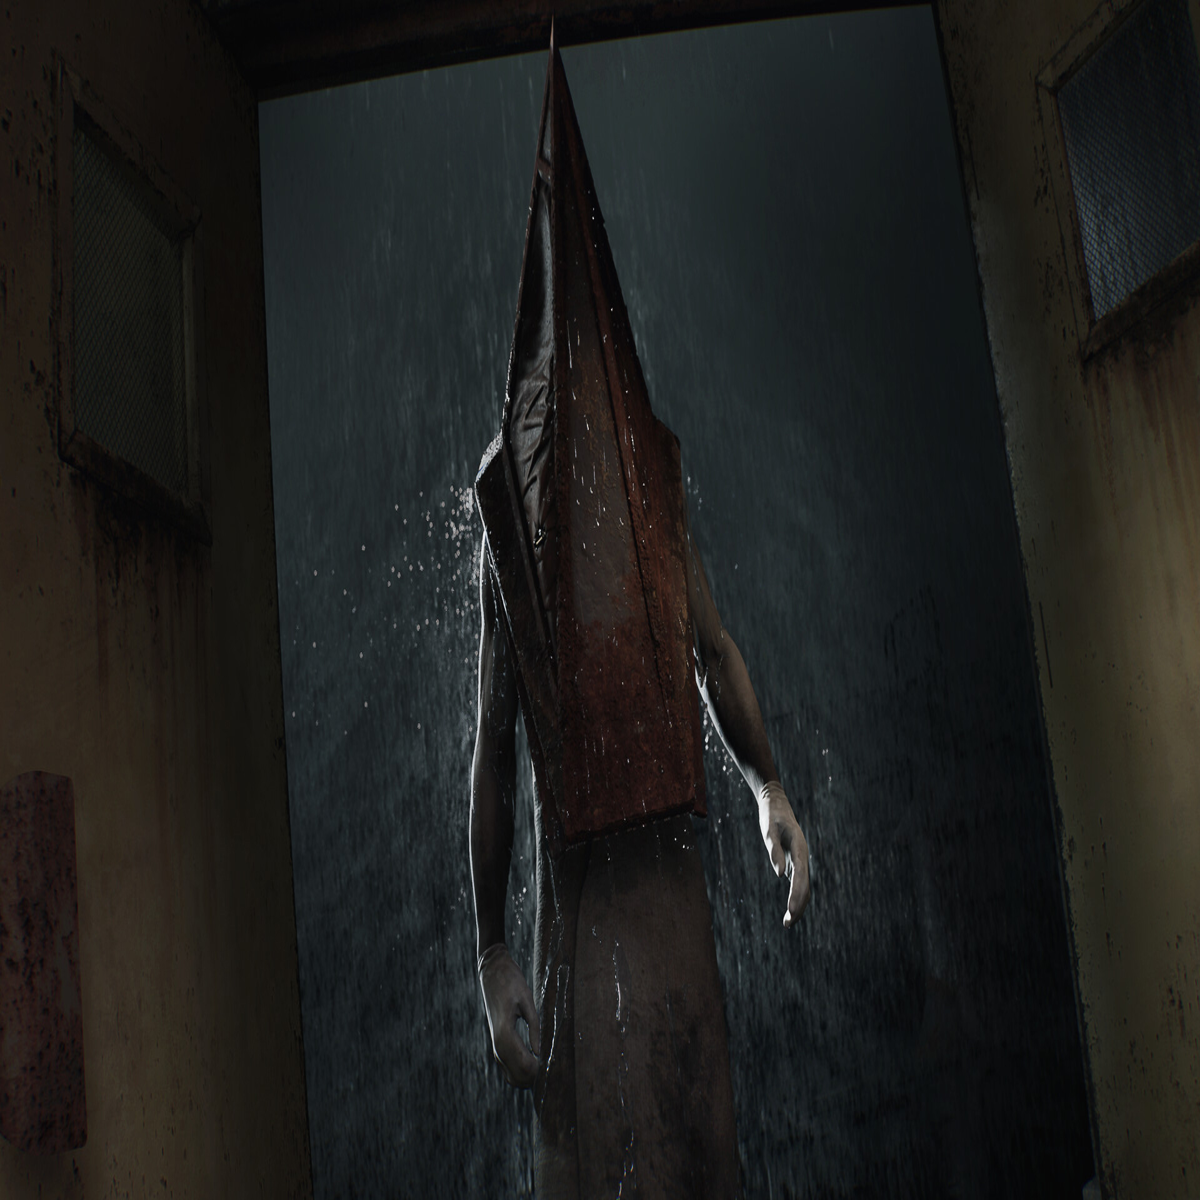 Silent Hill 2's Pyramid Head Has Lost A Little Luster Over The Years